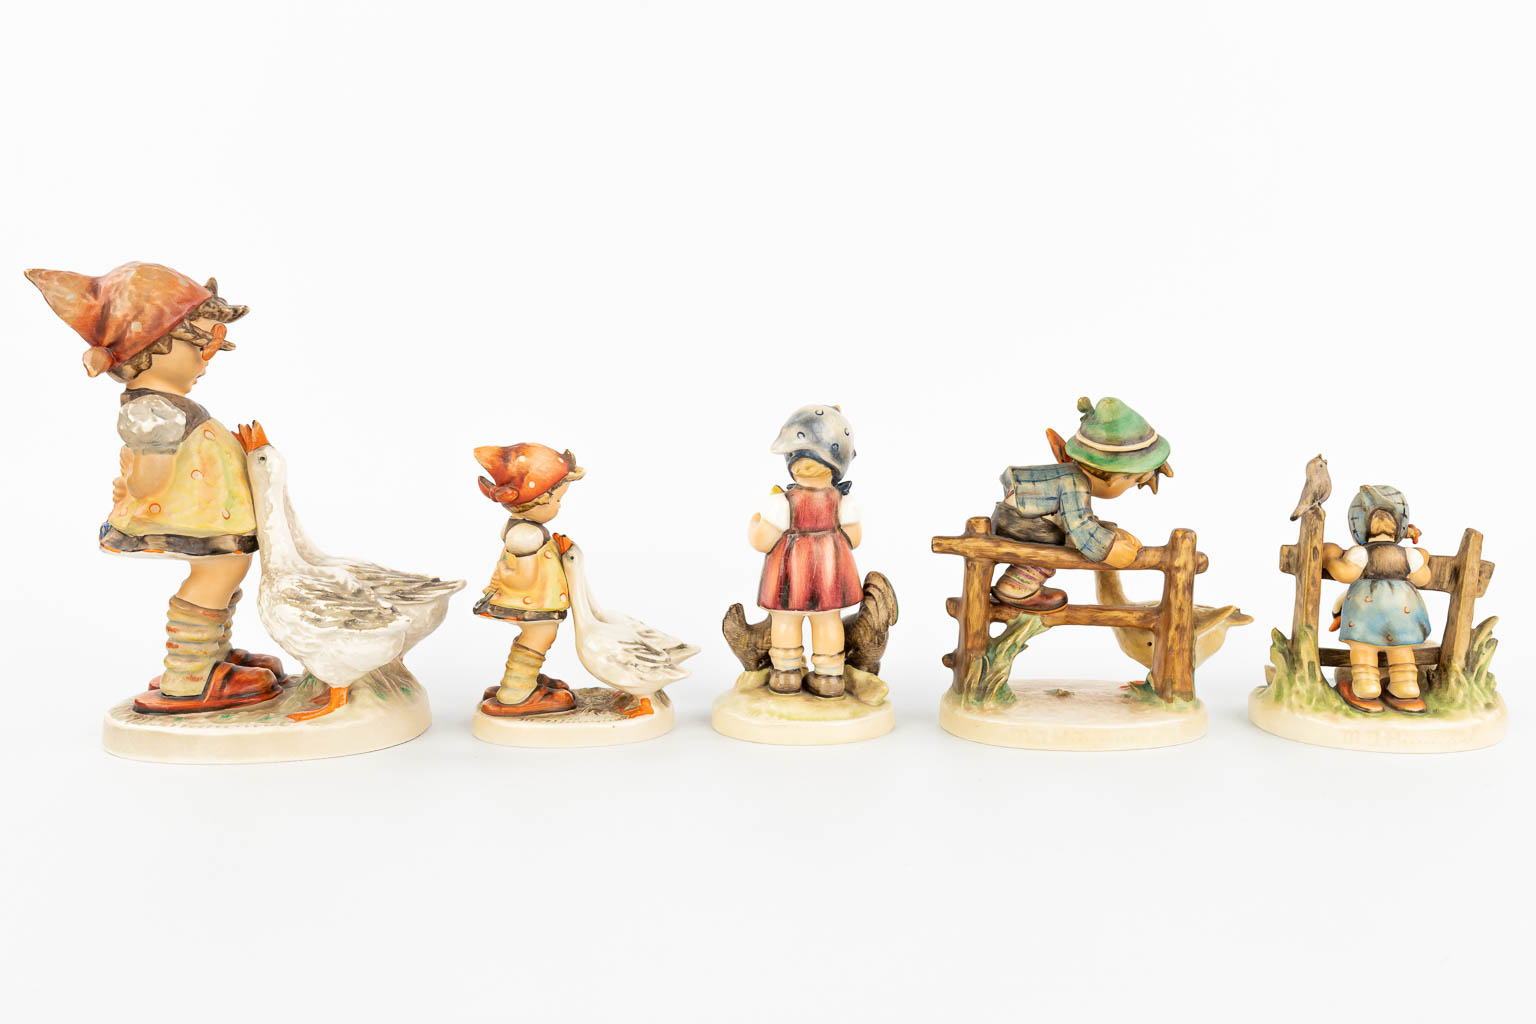 A collection of 5 statues made by Hummel. (H:20cm)